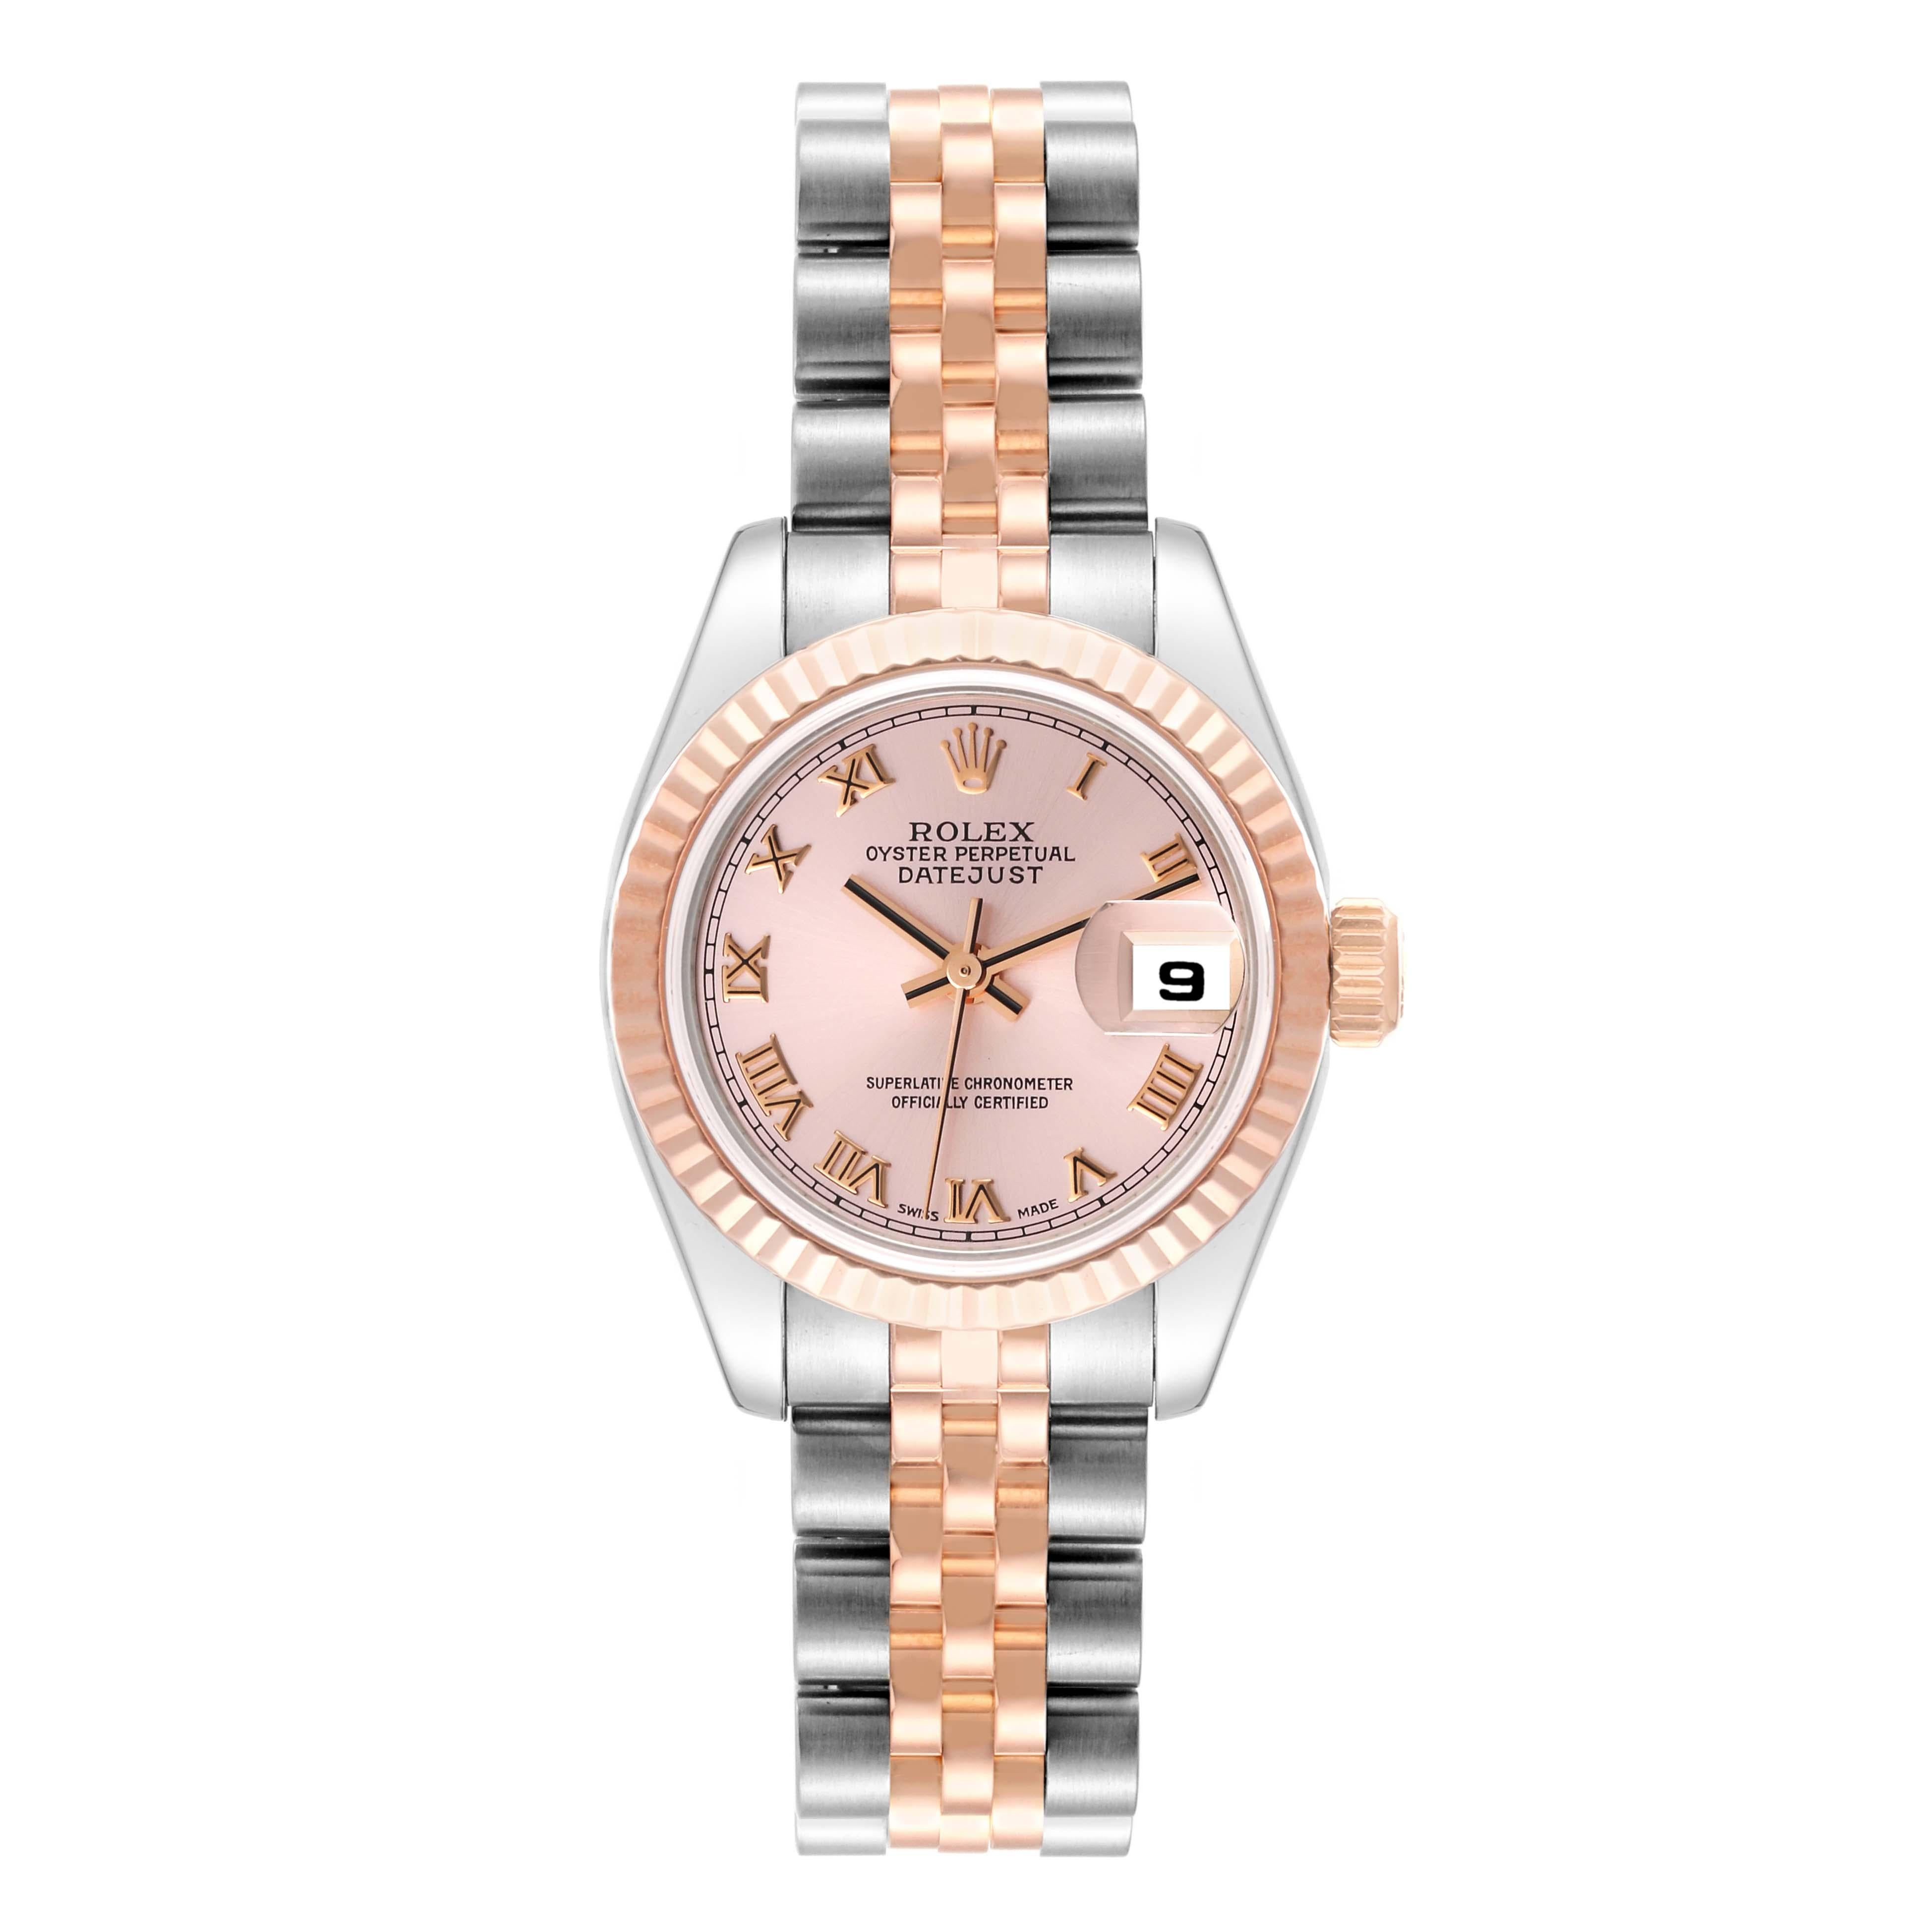 Rolex Datejust Roman Dial Steel Rose Gold Ladies Watch 179171. Officially certified chronometer automatic self-winding movement. Stainless steel oyster case 26.0 mm in diameter. Rolex logo on an 18K Everose rose gold crown. 18k Everose rose gold